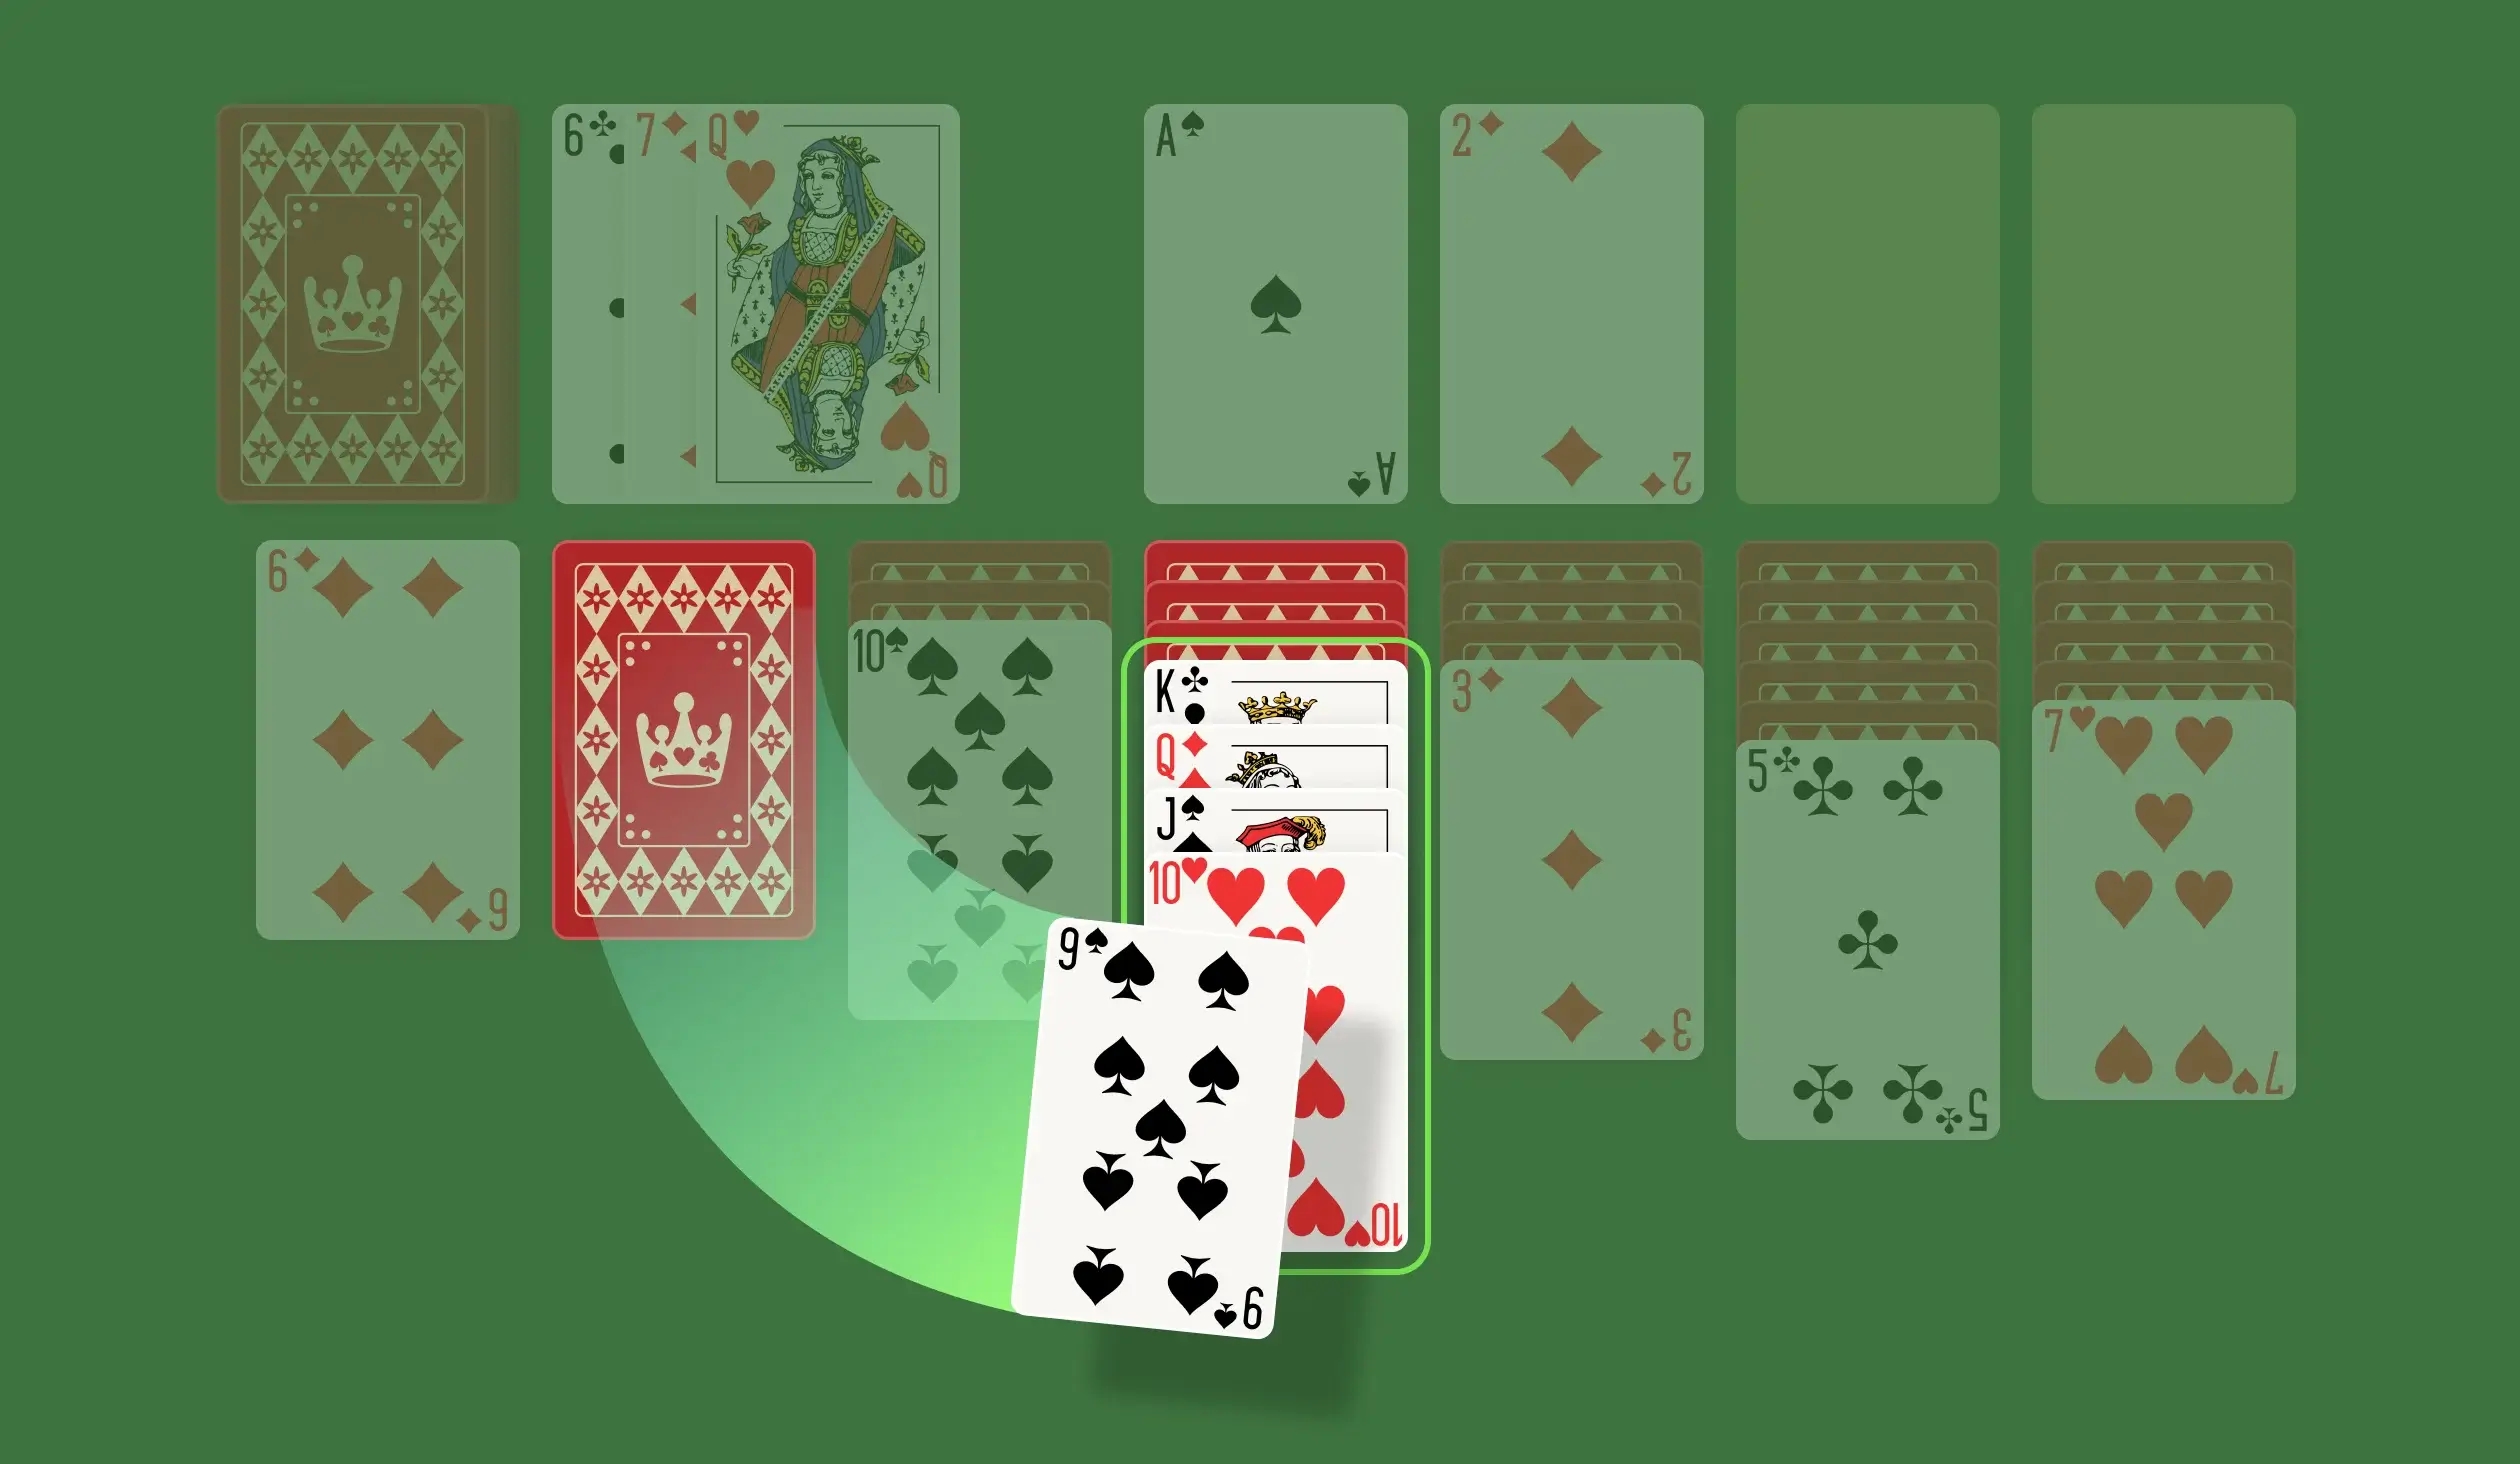 Start playing Solitaire Turn-3 by organizing the cards in the Tableau columns in descending order. However, remember that the colors must alternate when arranging them in the Tableau. You can move cards either one at a time or in a sequence. The more cards you organize, the more face-down cards you can reveal when playing. Soon you might even clear an entire column. However, don’t fill it up with just any sequence of cards! Instead, strategize and make your moves wisely.